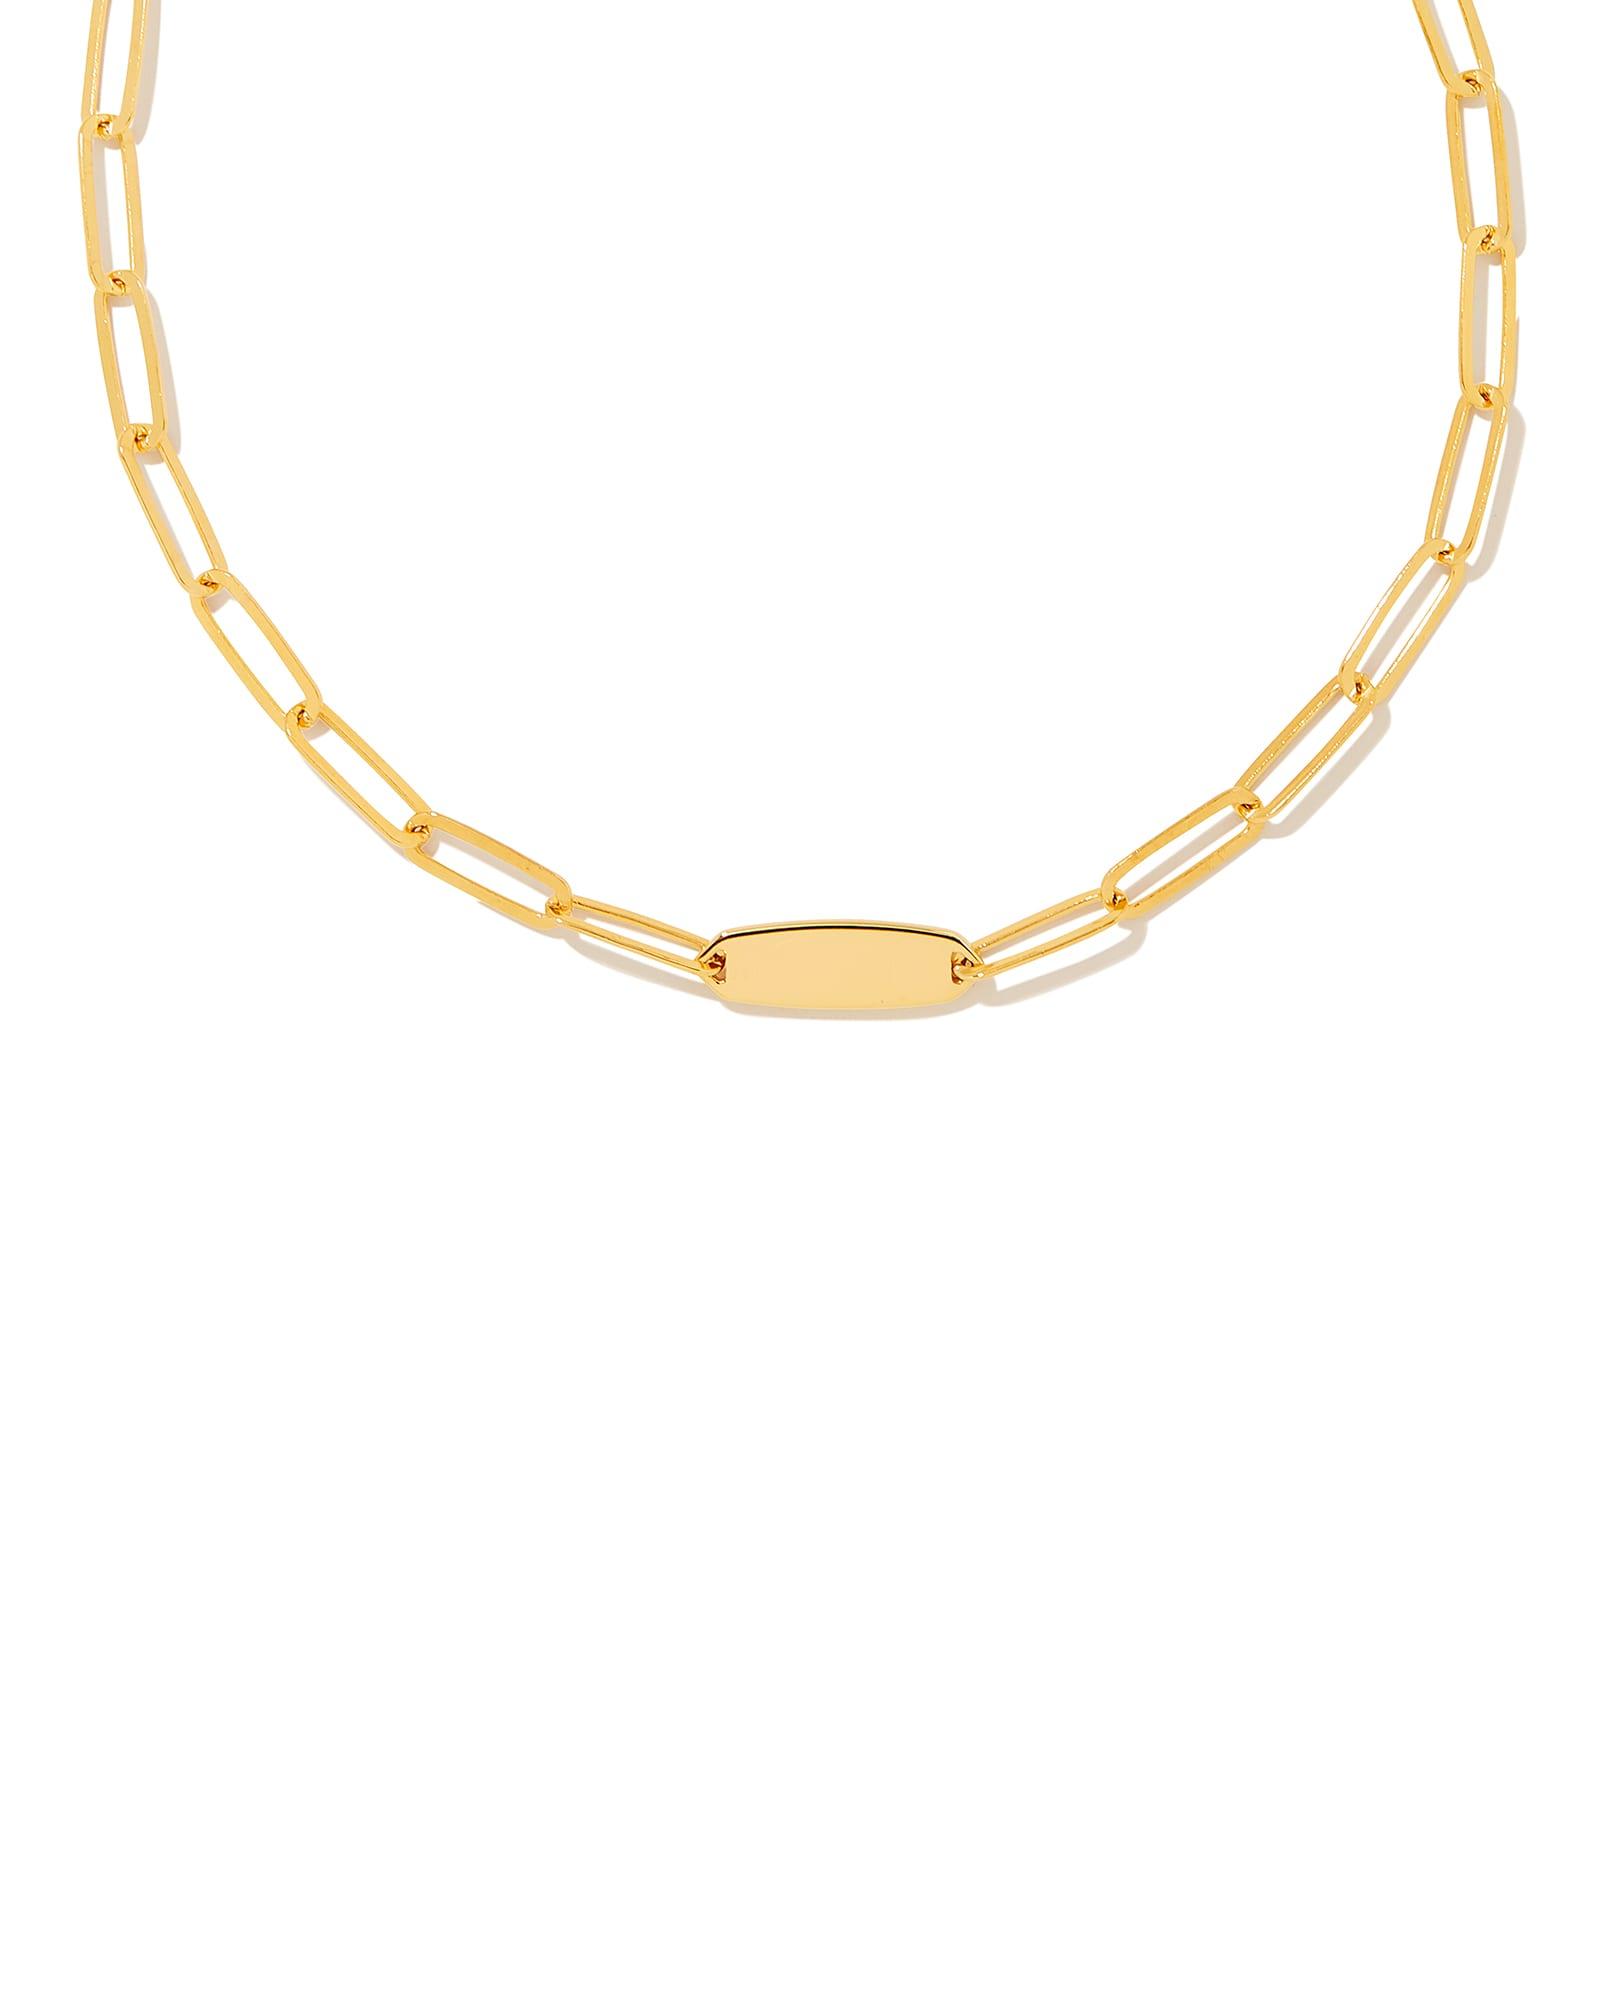 Kendra Scott Channing Multi Strand Necklace in Gold | The Summit at Fritz  Farm